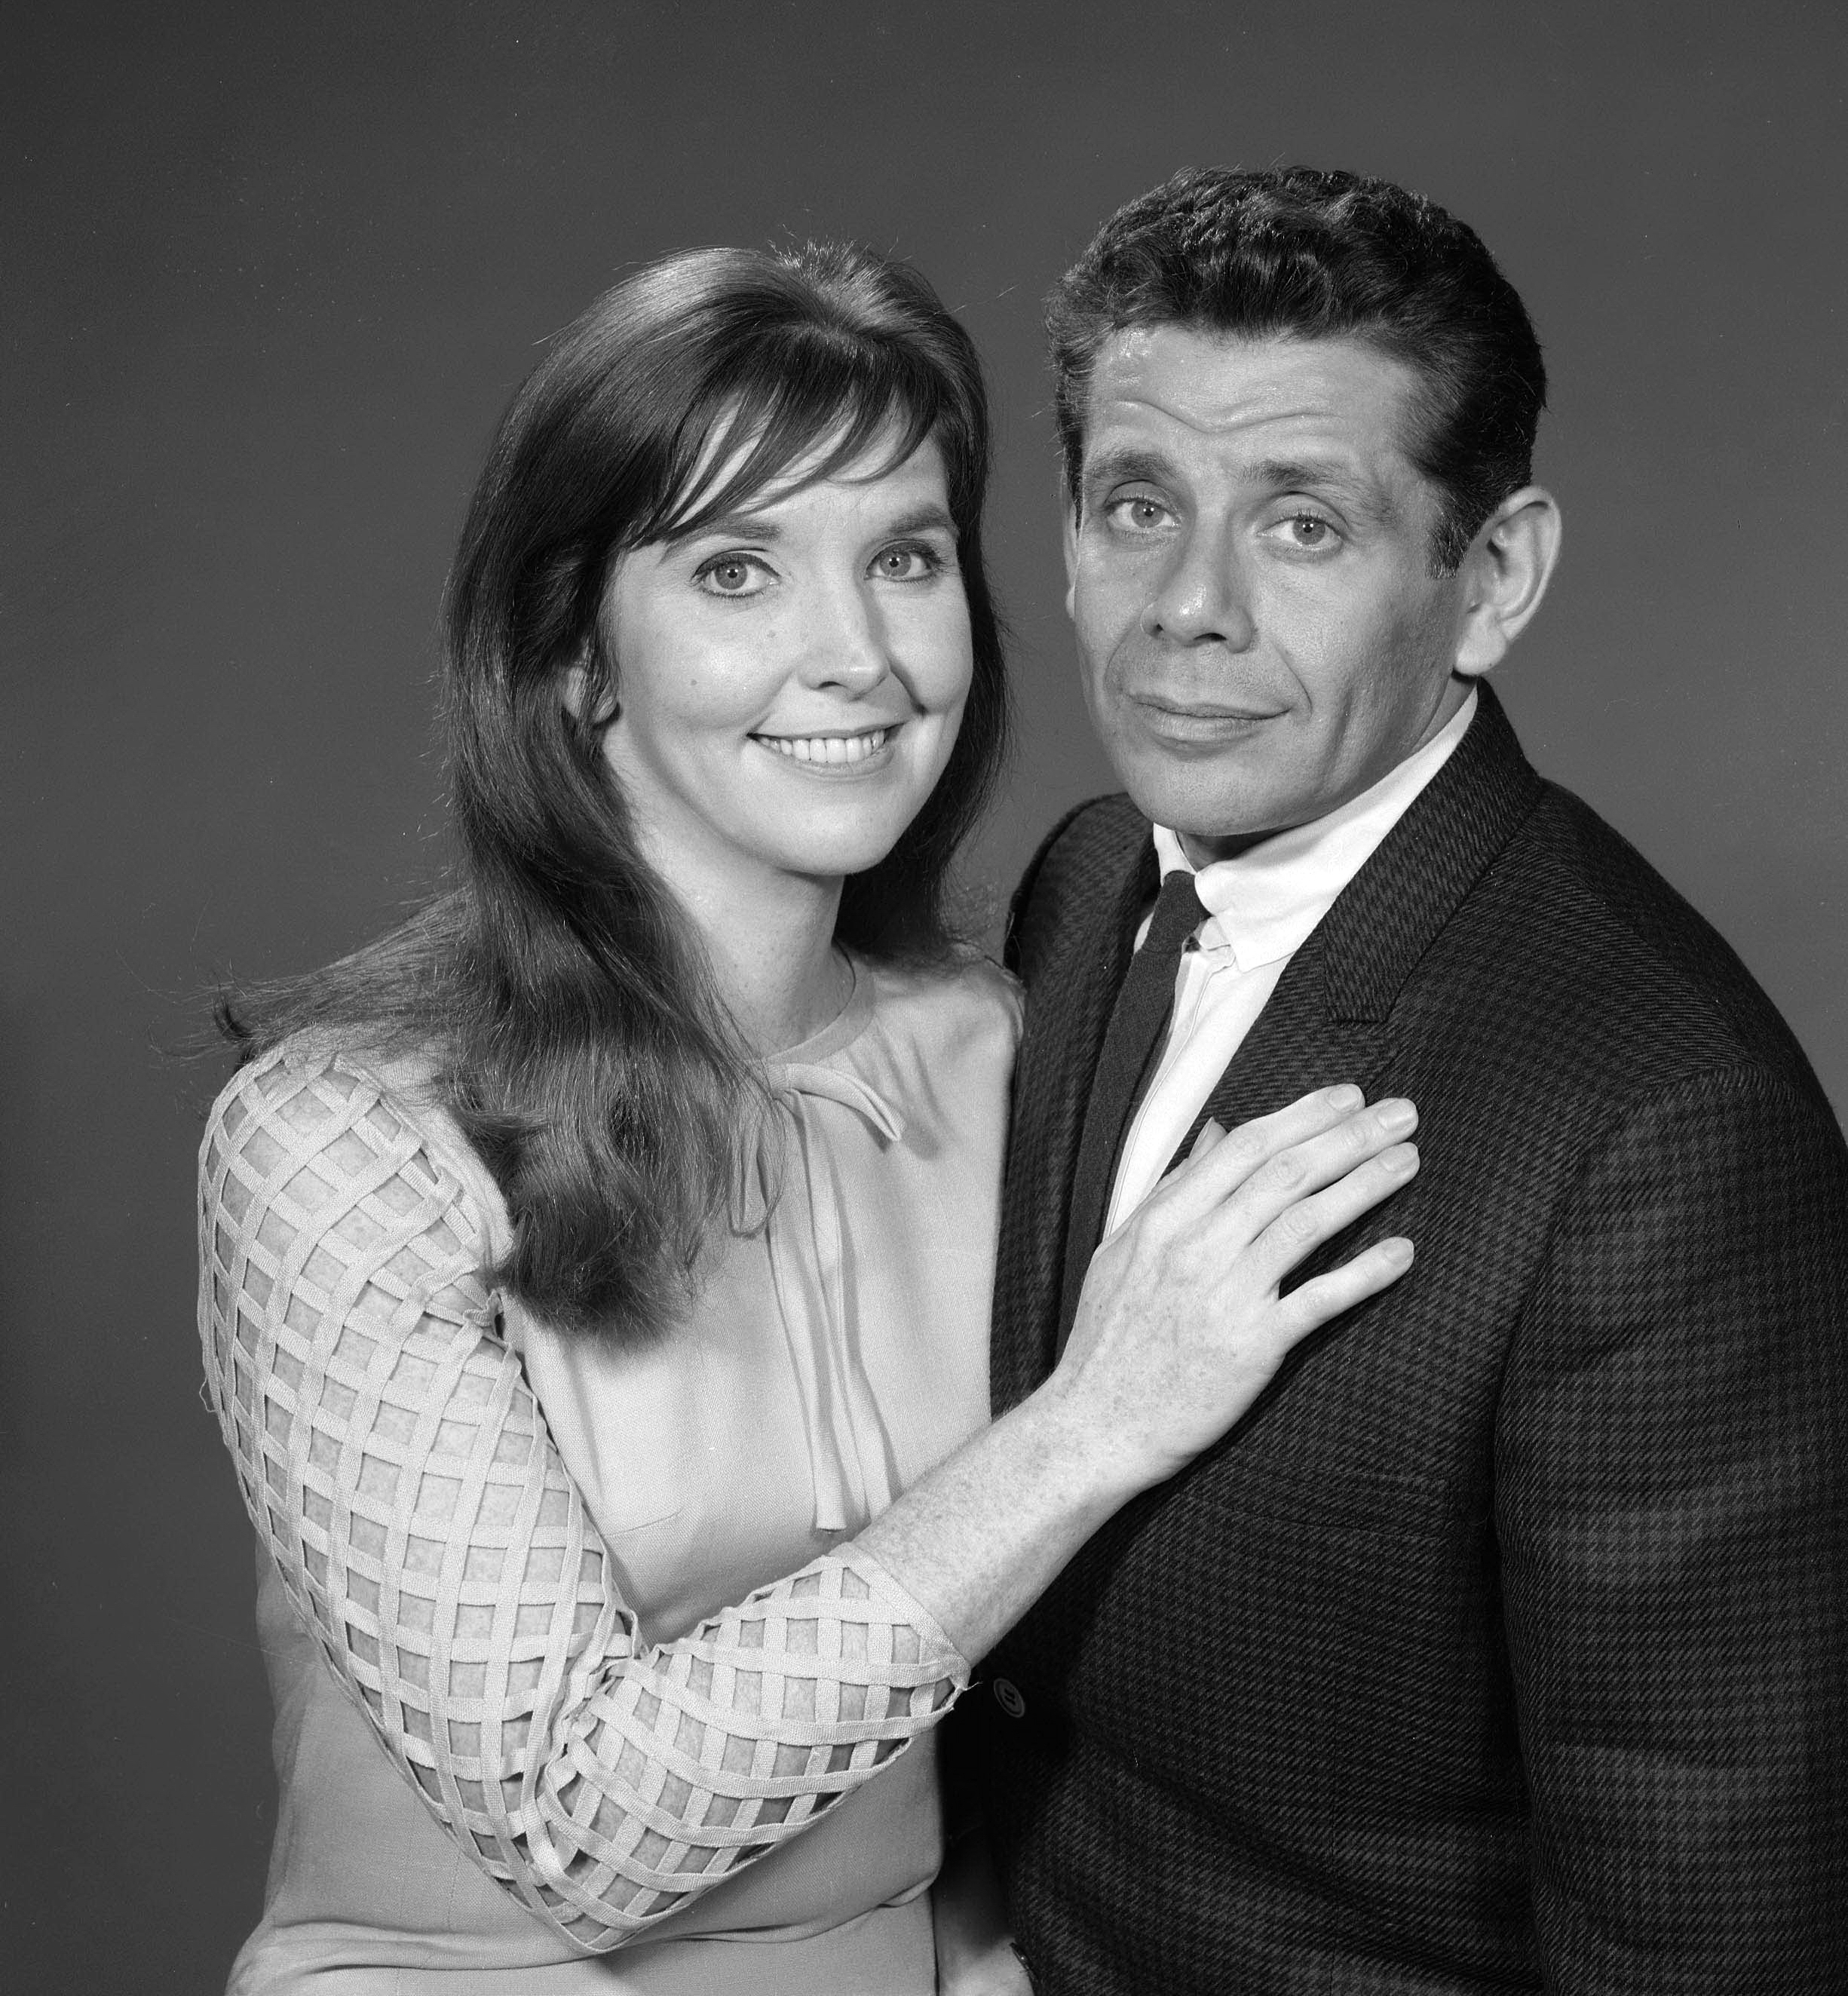 Anne Meara and Jerry Stiller on "The Ed Sullivan Show" on November 7, 1966. | Source: Getty Images